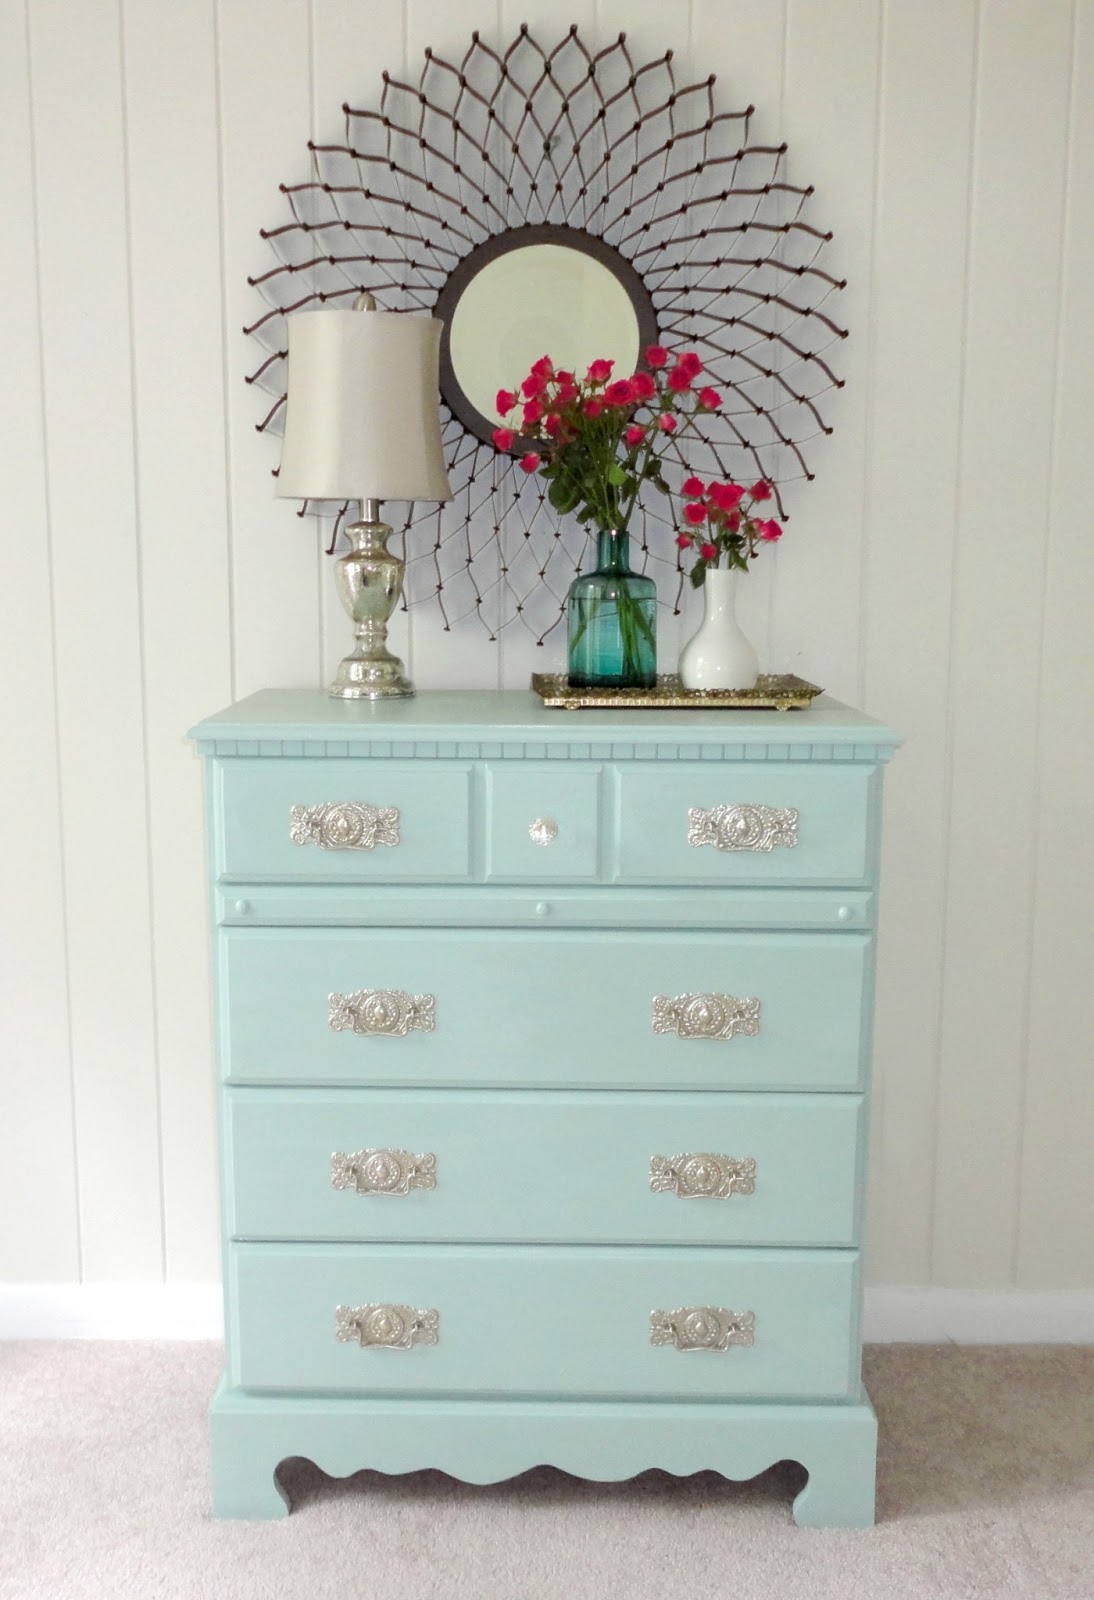 How To Paint Laminate Furniture In 3, How To Paint A Laminate Dresser With Chalk